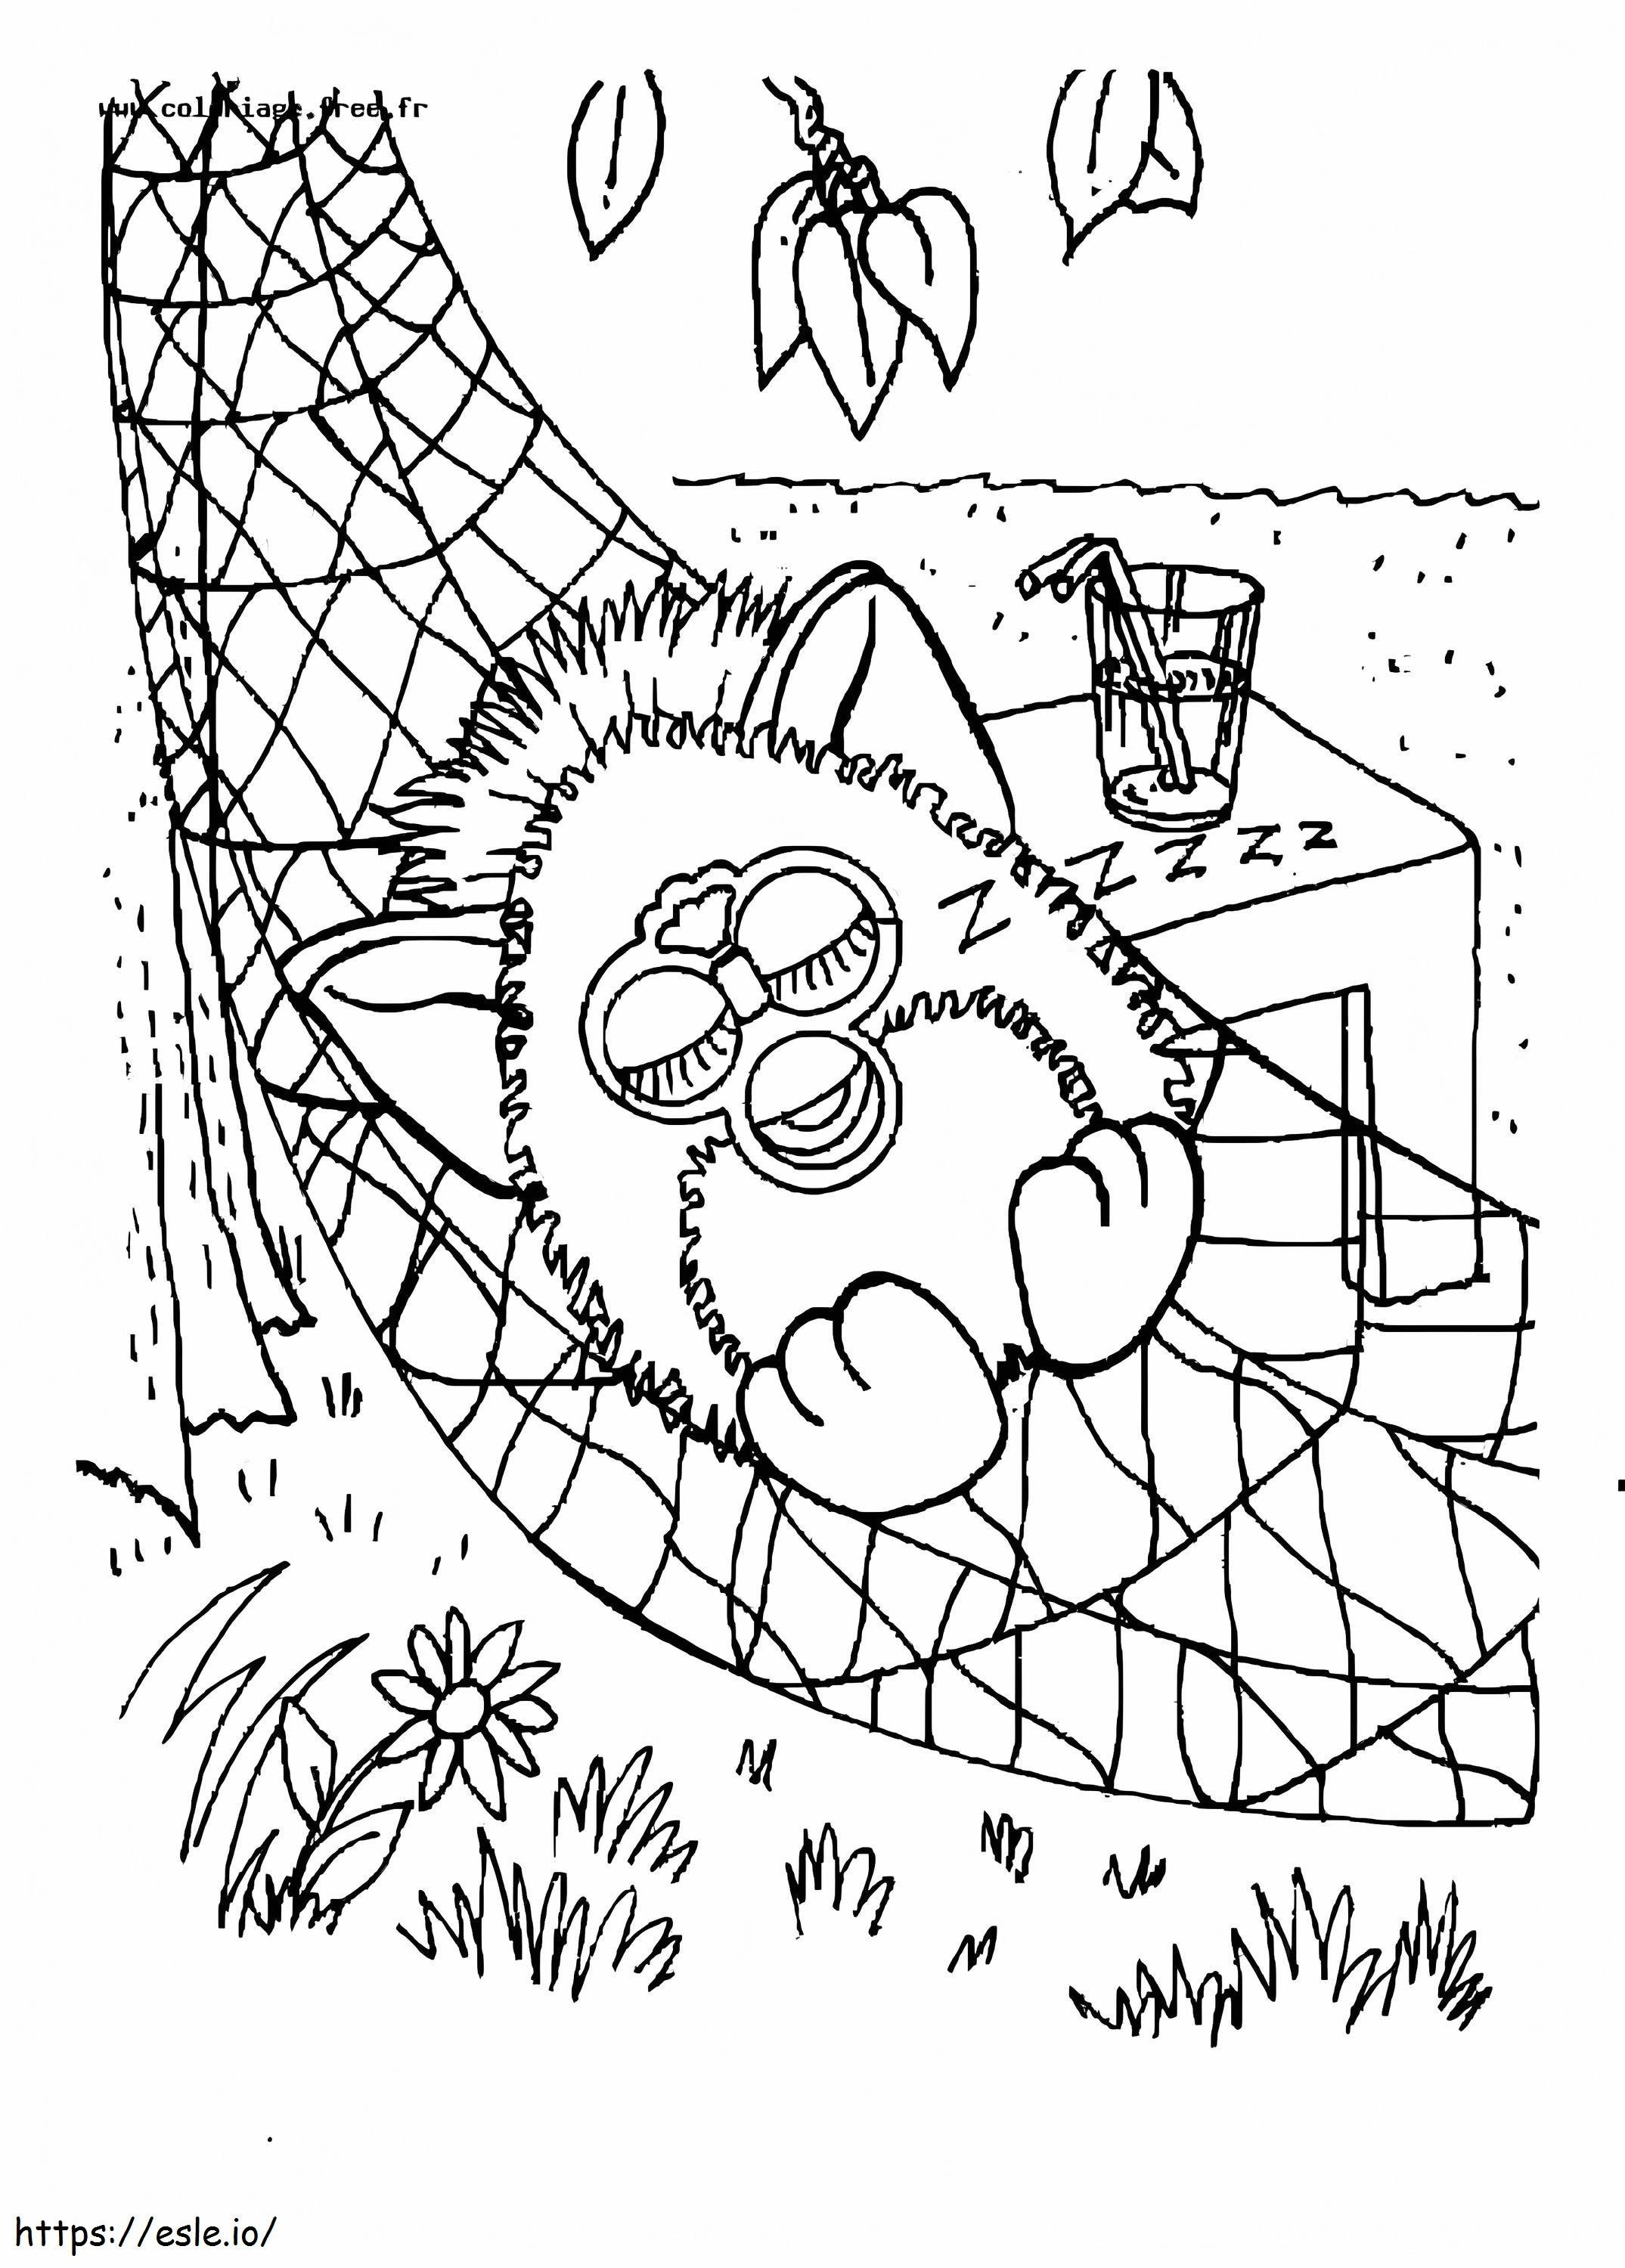 Furby Sleeping coloring page